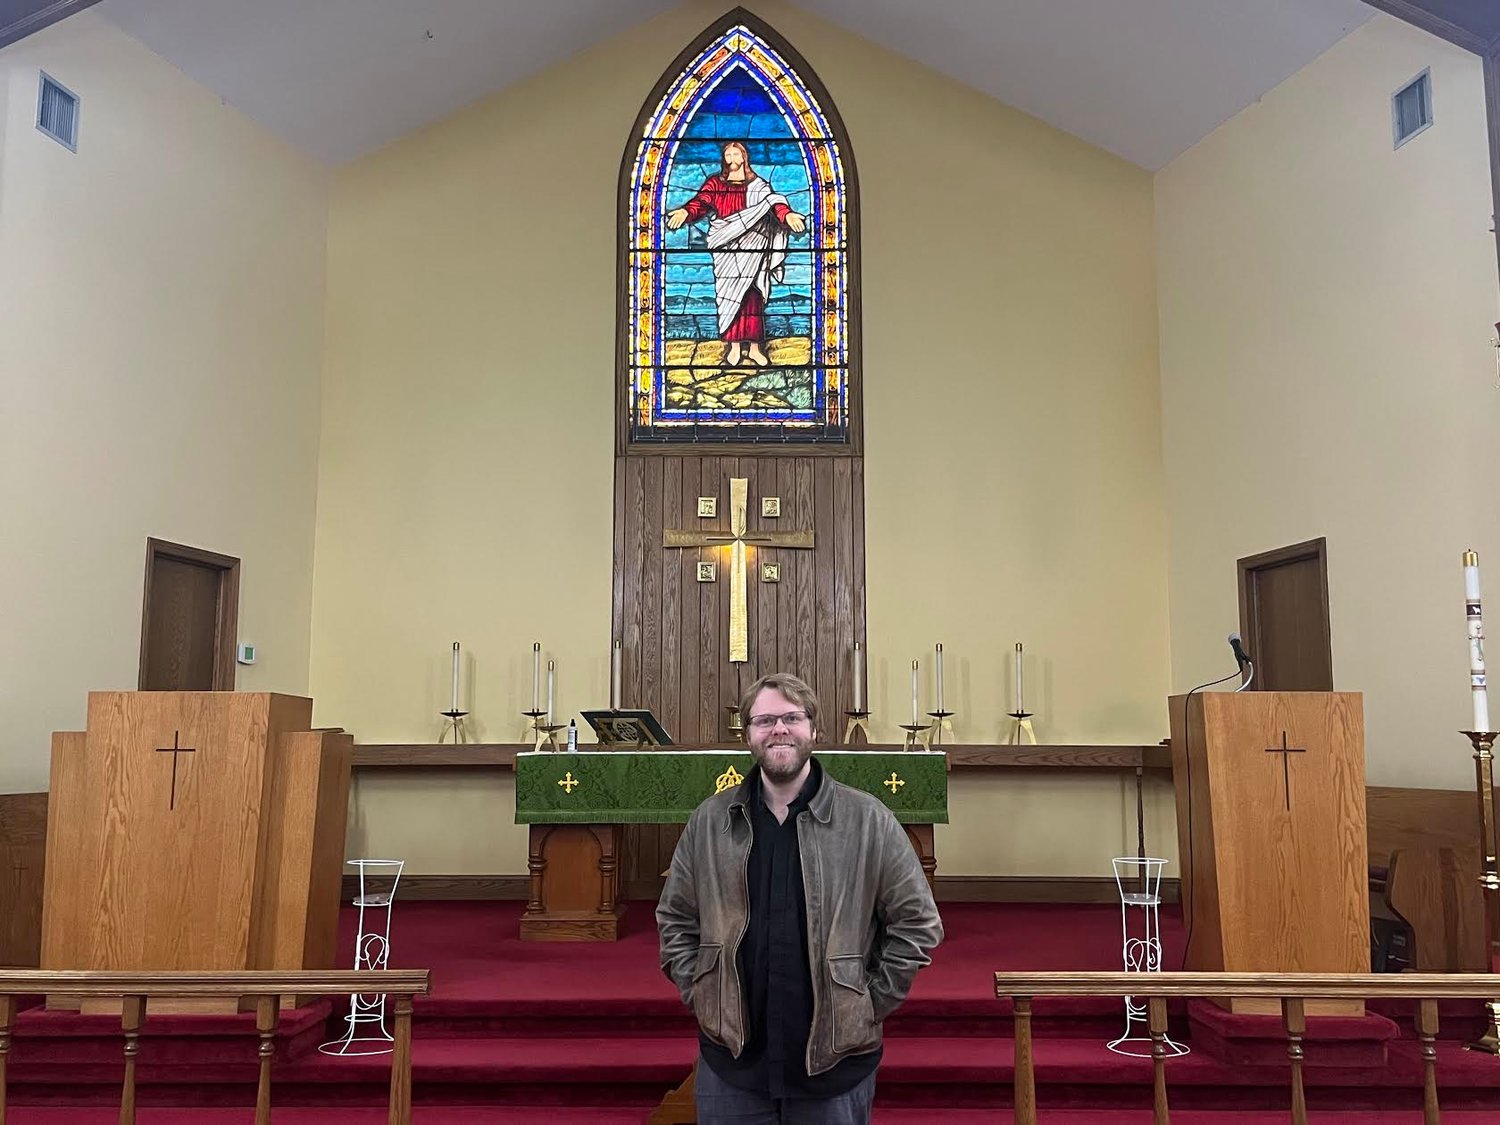 Bringing this vacancy to an end is 36-year-old pastor Steven Williamson-Link, who arrived on Long Island on Jan. 10 and will be officially installed on Feb. 4